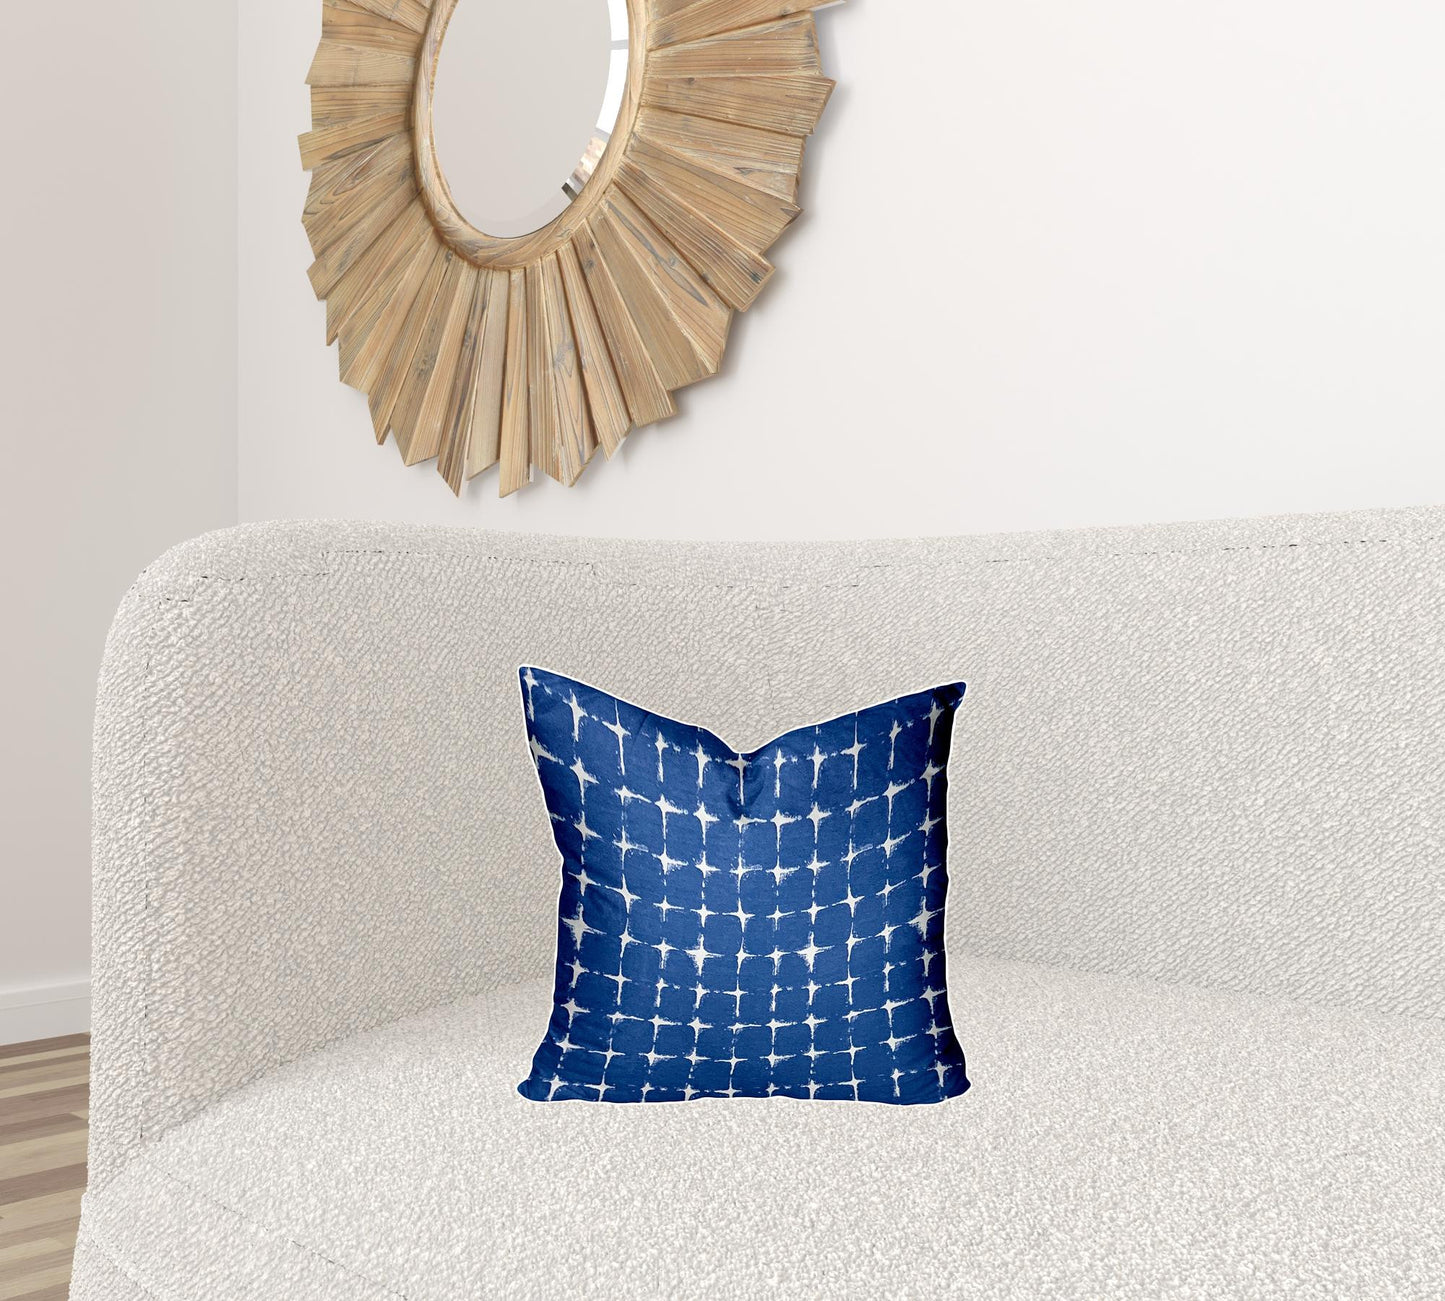 16" X 16" Blue And White Zippered Gingham Throw Indoor Outdoor Pillow Cover